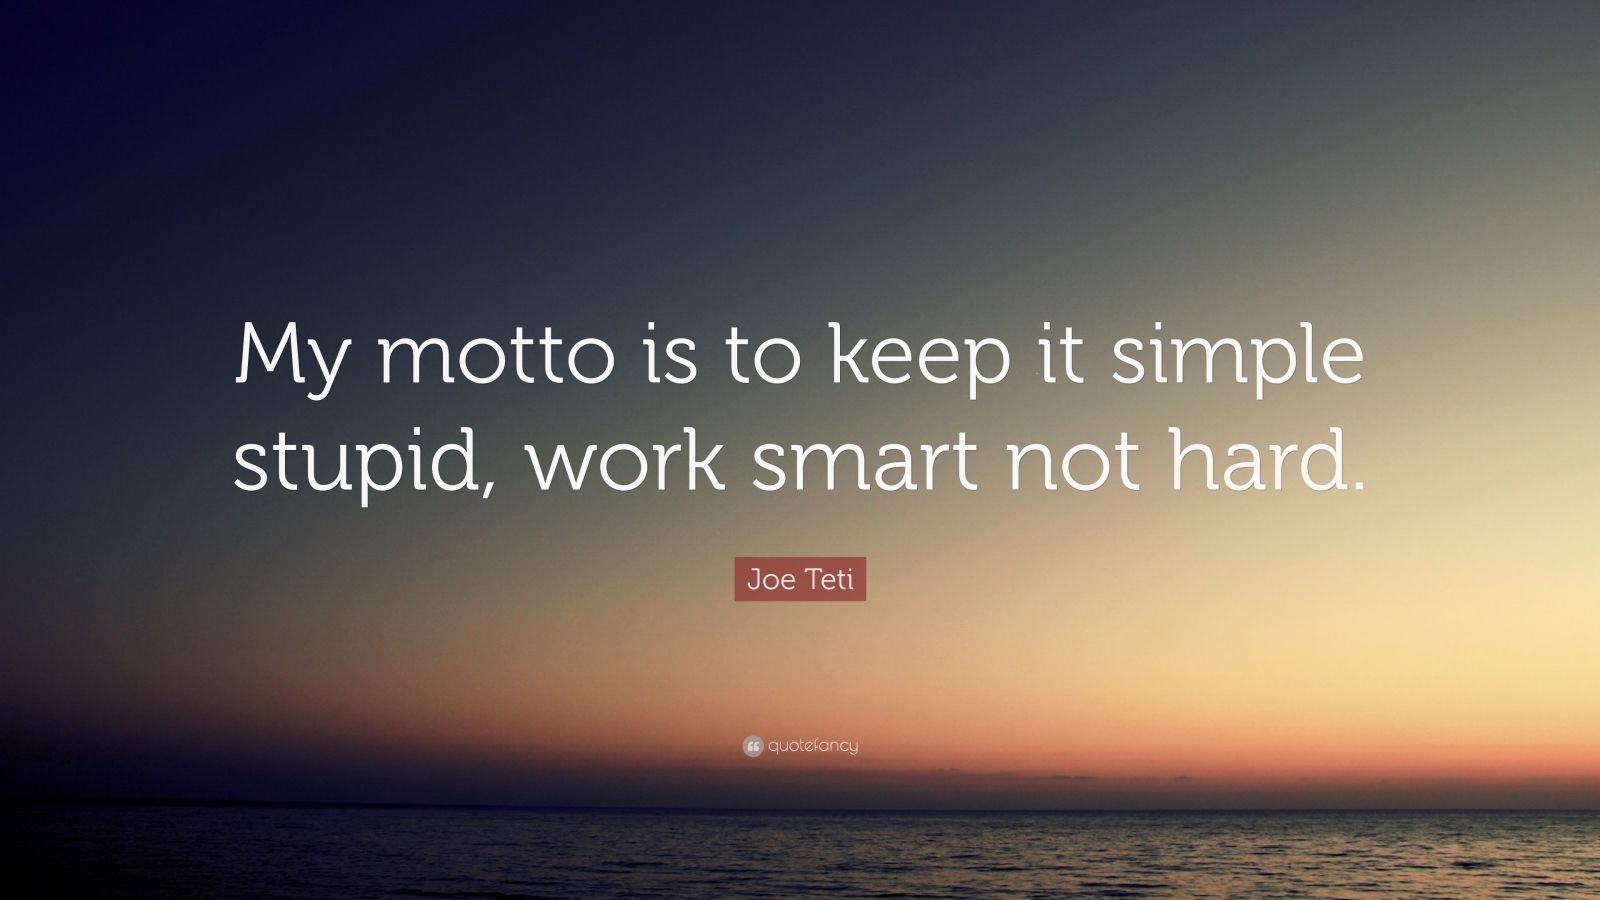 Joe Teti Quote: "My motto is to keep it simple stupid, work smart not hard." (9 wallpapers ...